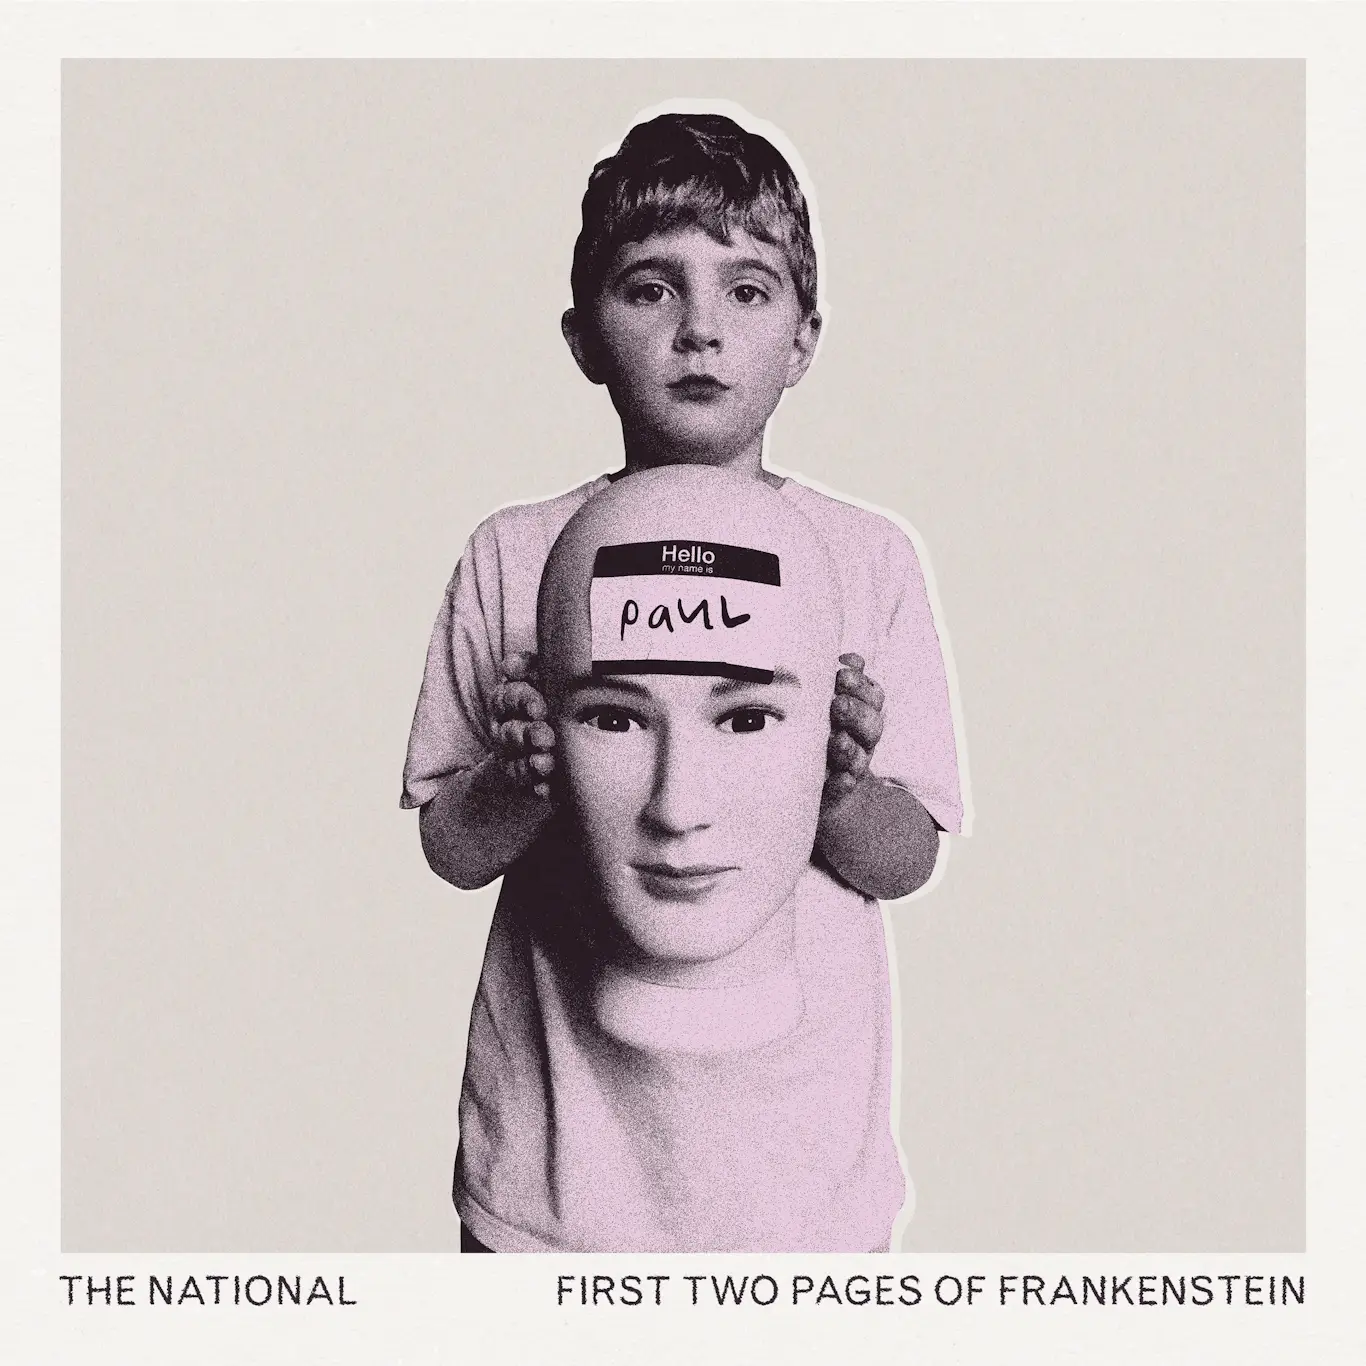 ALBUM REVIEW: The National – First Two Pages of Frankenstein